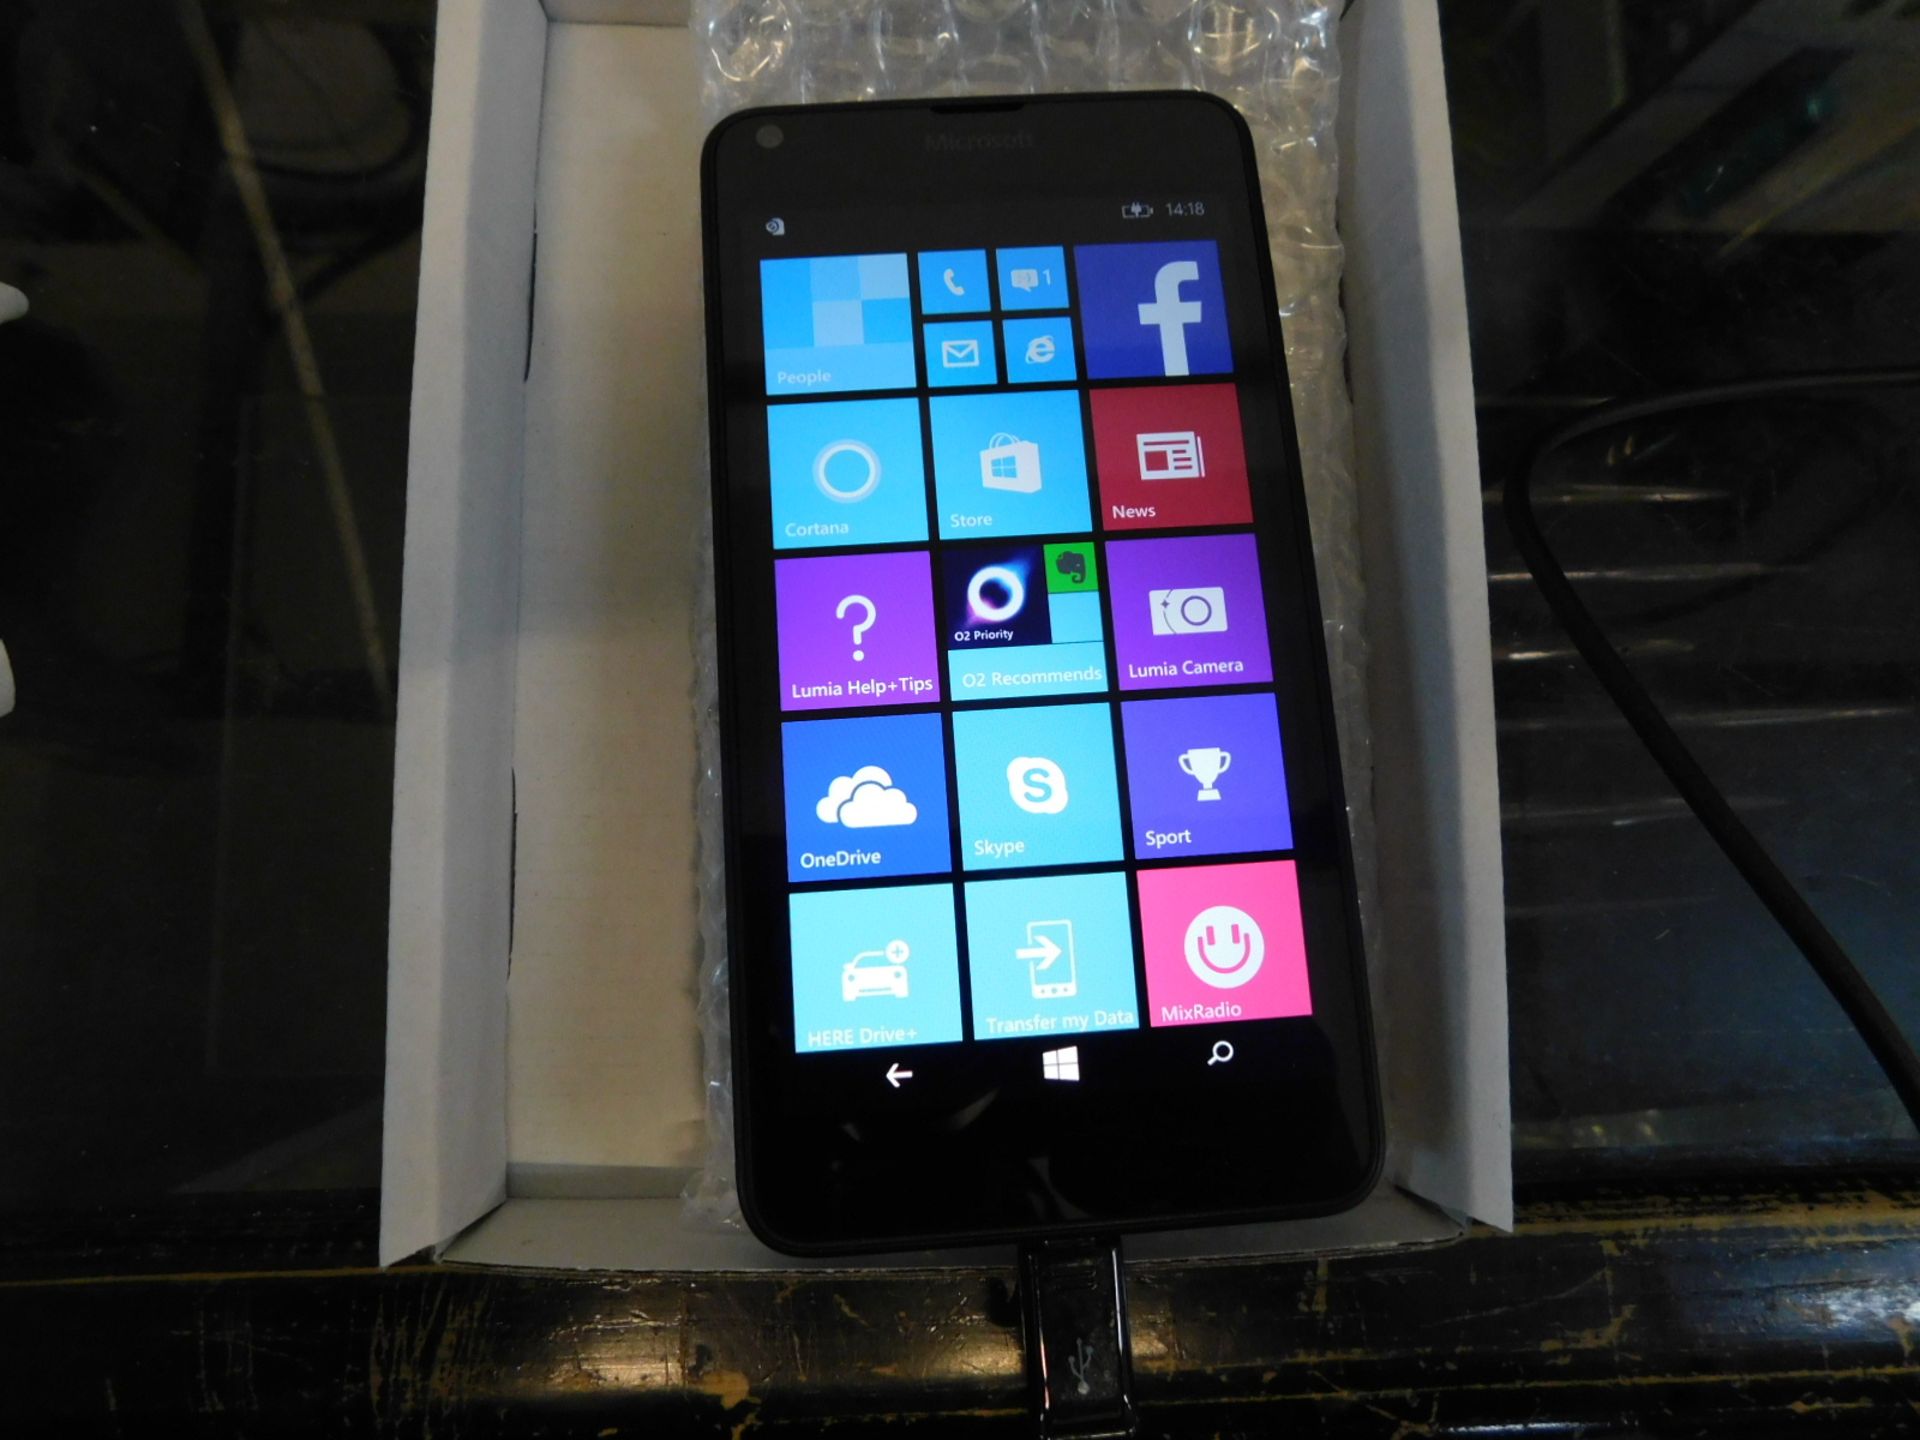 1 MICROSOFT LUMIA 640 LTE 8GB IN BLACK RRP Â£49.99 (SELLER REFURBISHED, WORKING, CHARGING CABLE